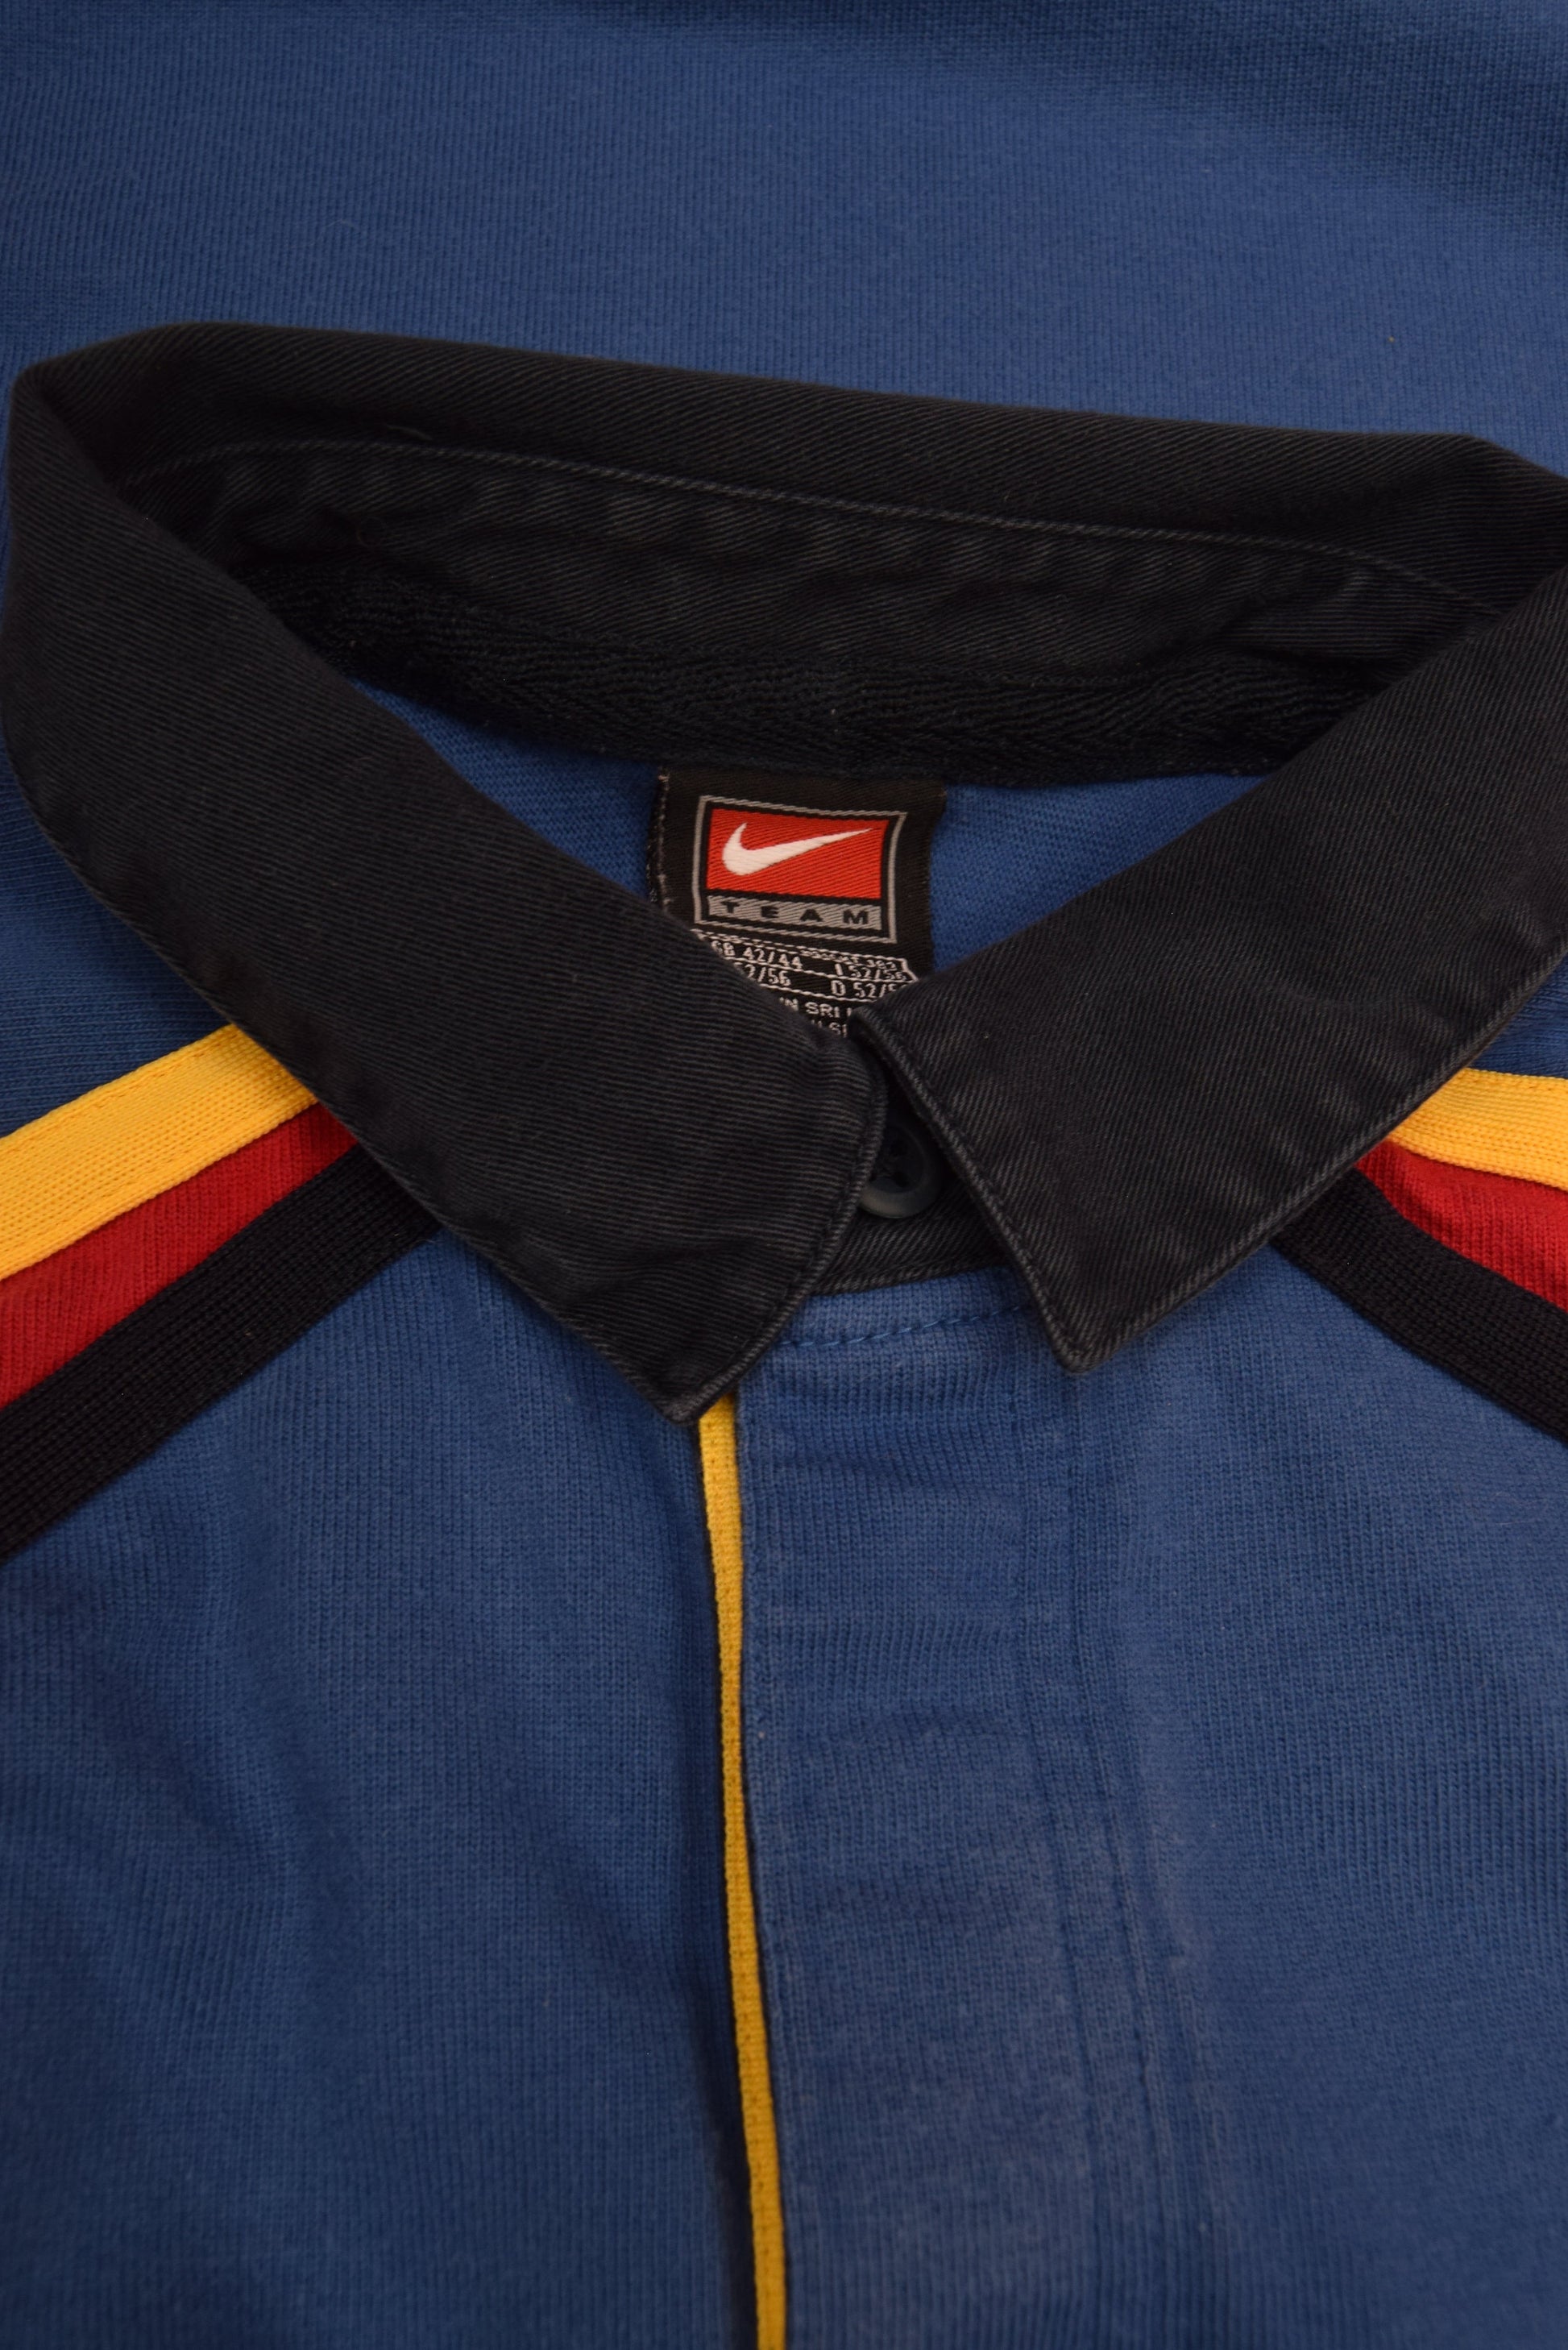 Rare Vintage FC Barcelona Nike Team 1999? - 2000? Polo Rugby Shirt Size L Red Blue Yellow